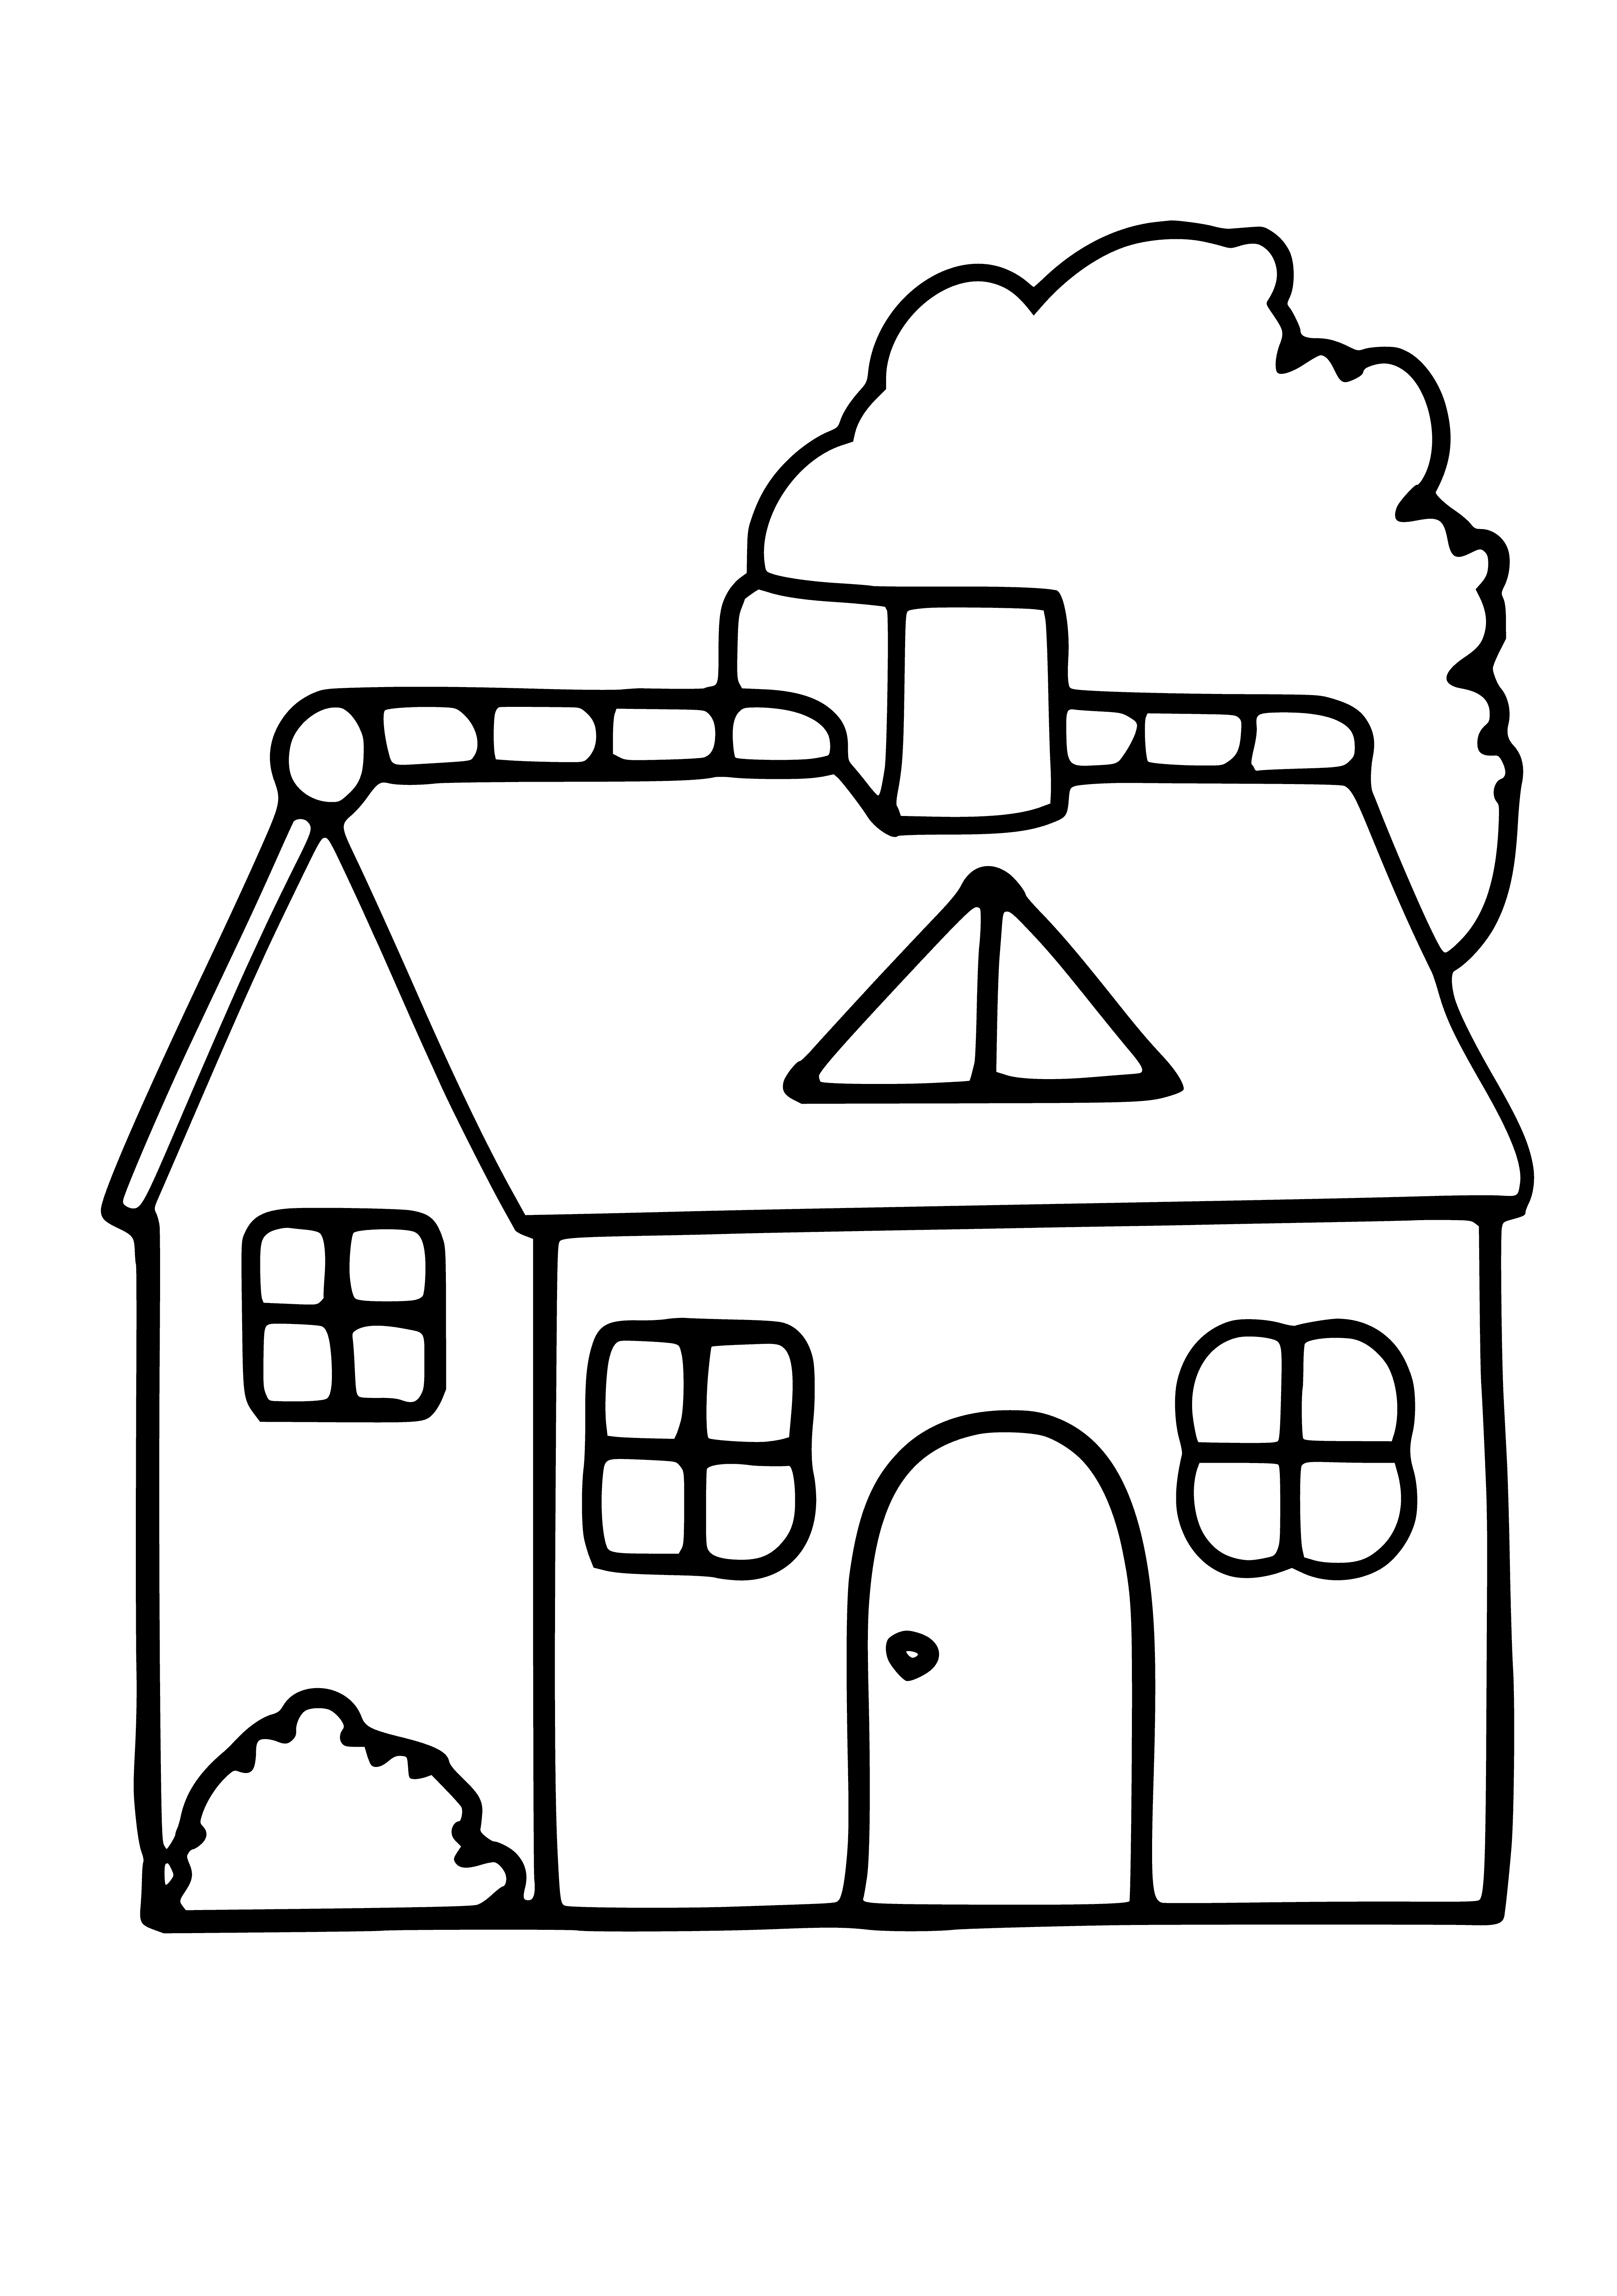 coloring page: Coloring page for kids: 2-story house w/ door, windows, chimney. Have fun! #creative #kids